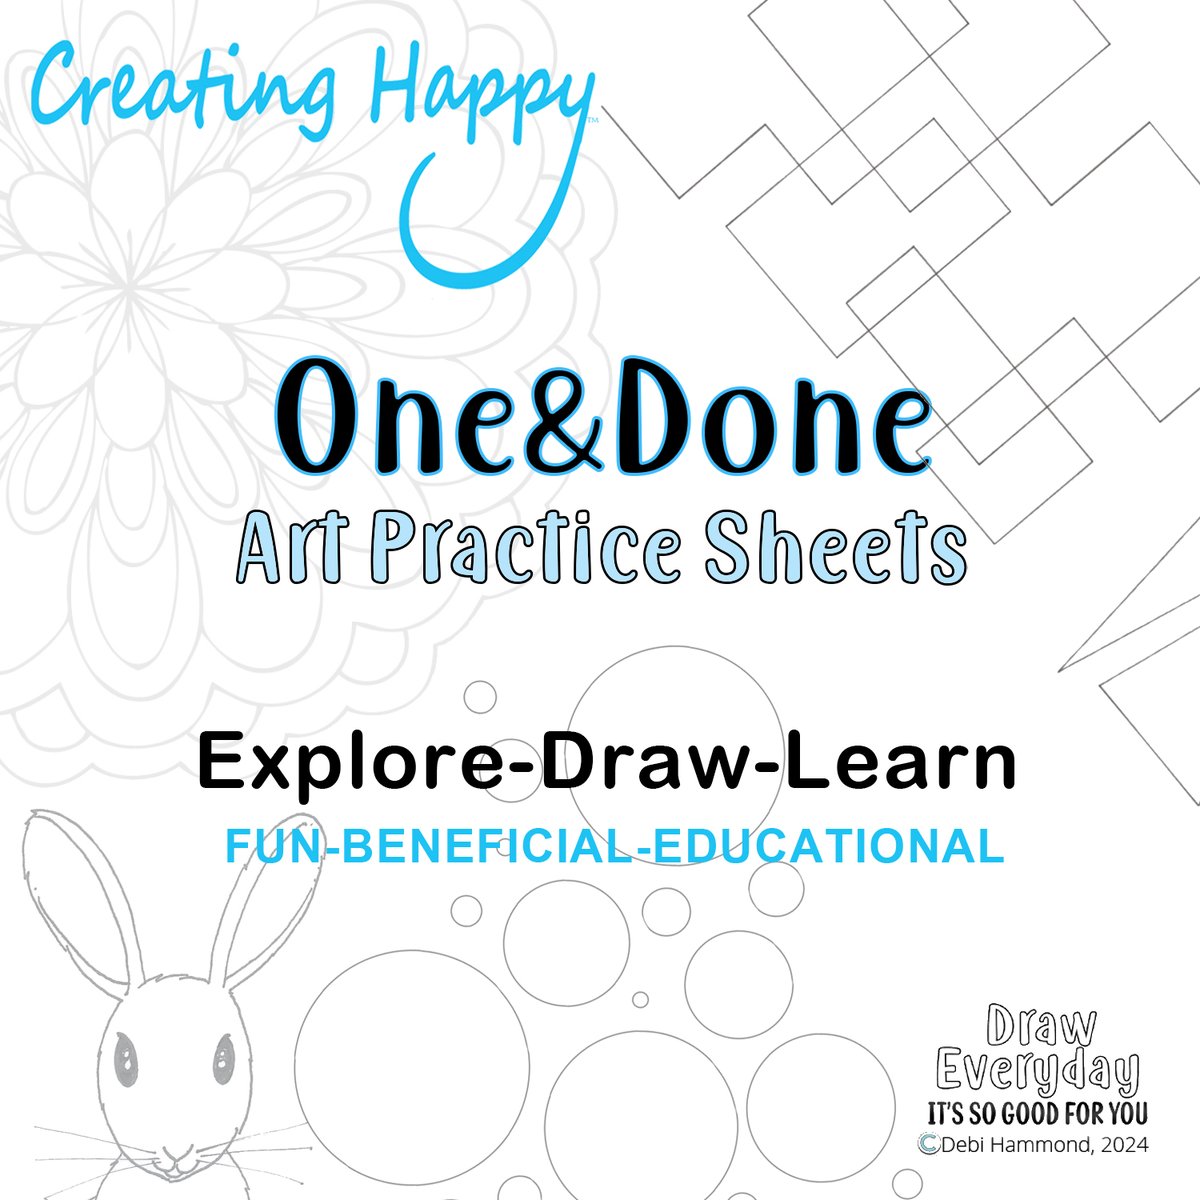 Drawing and creating is so good for you. Find 'One&Done' Art Practice Sheets and more for creating and tapping into your super-powers at creatinghappy.net

#artlessons #drawingadults #drawingchildren #exploredrawlearn #creatinghappy